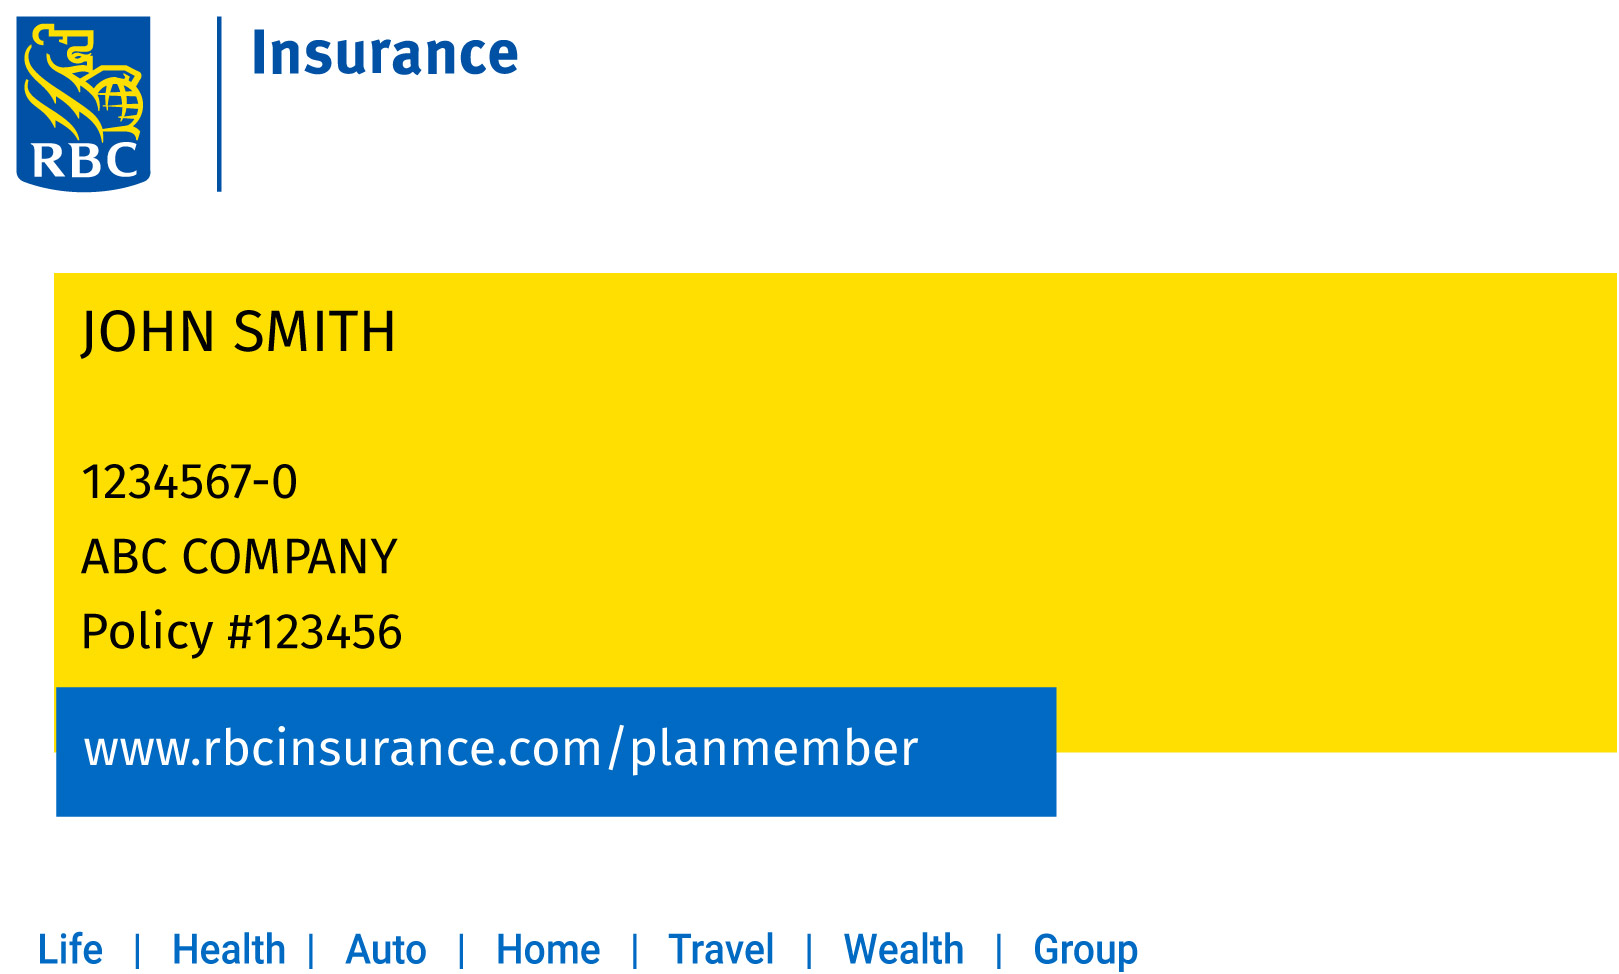 rbc travel insurance contact number